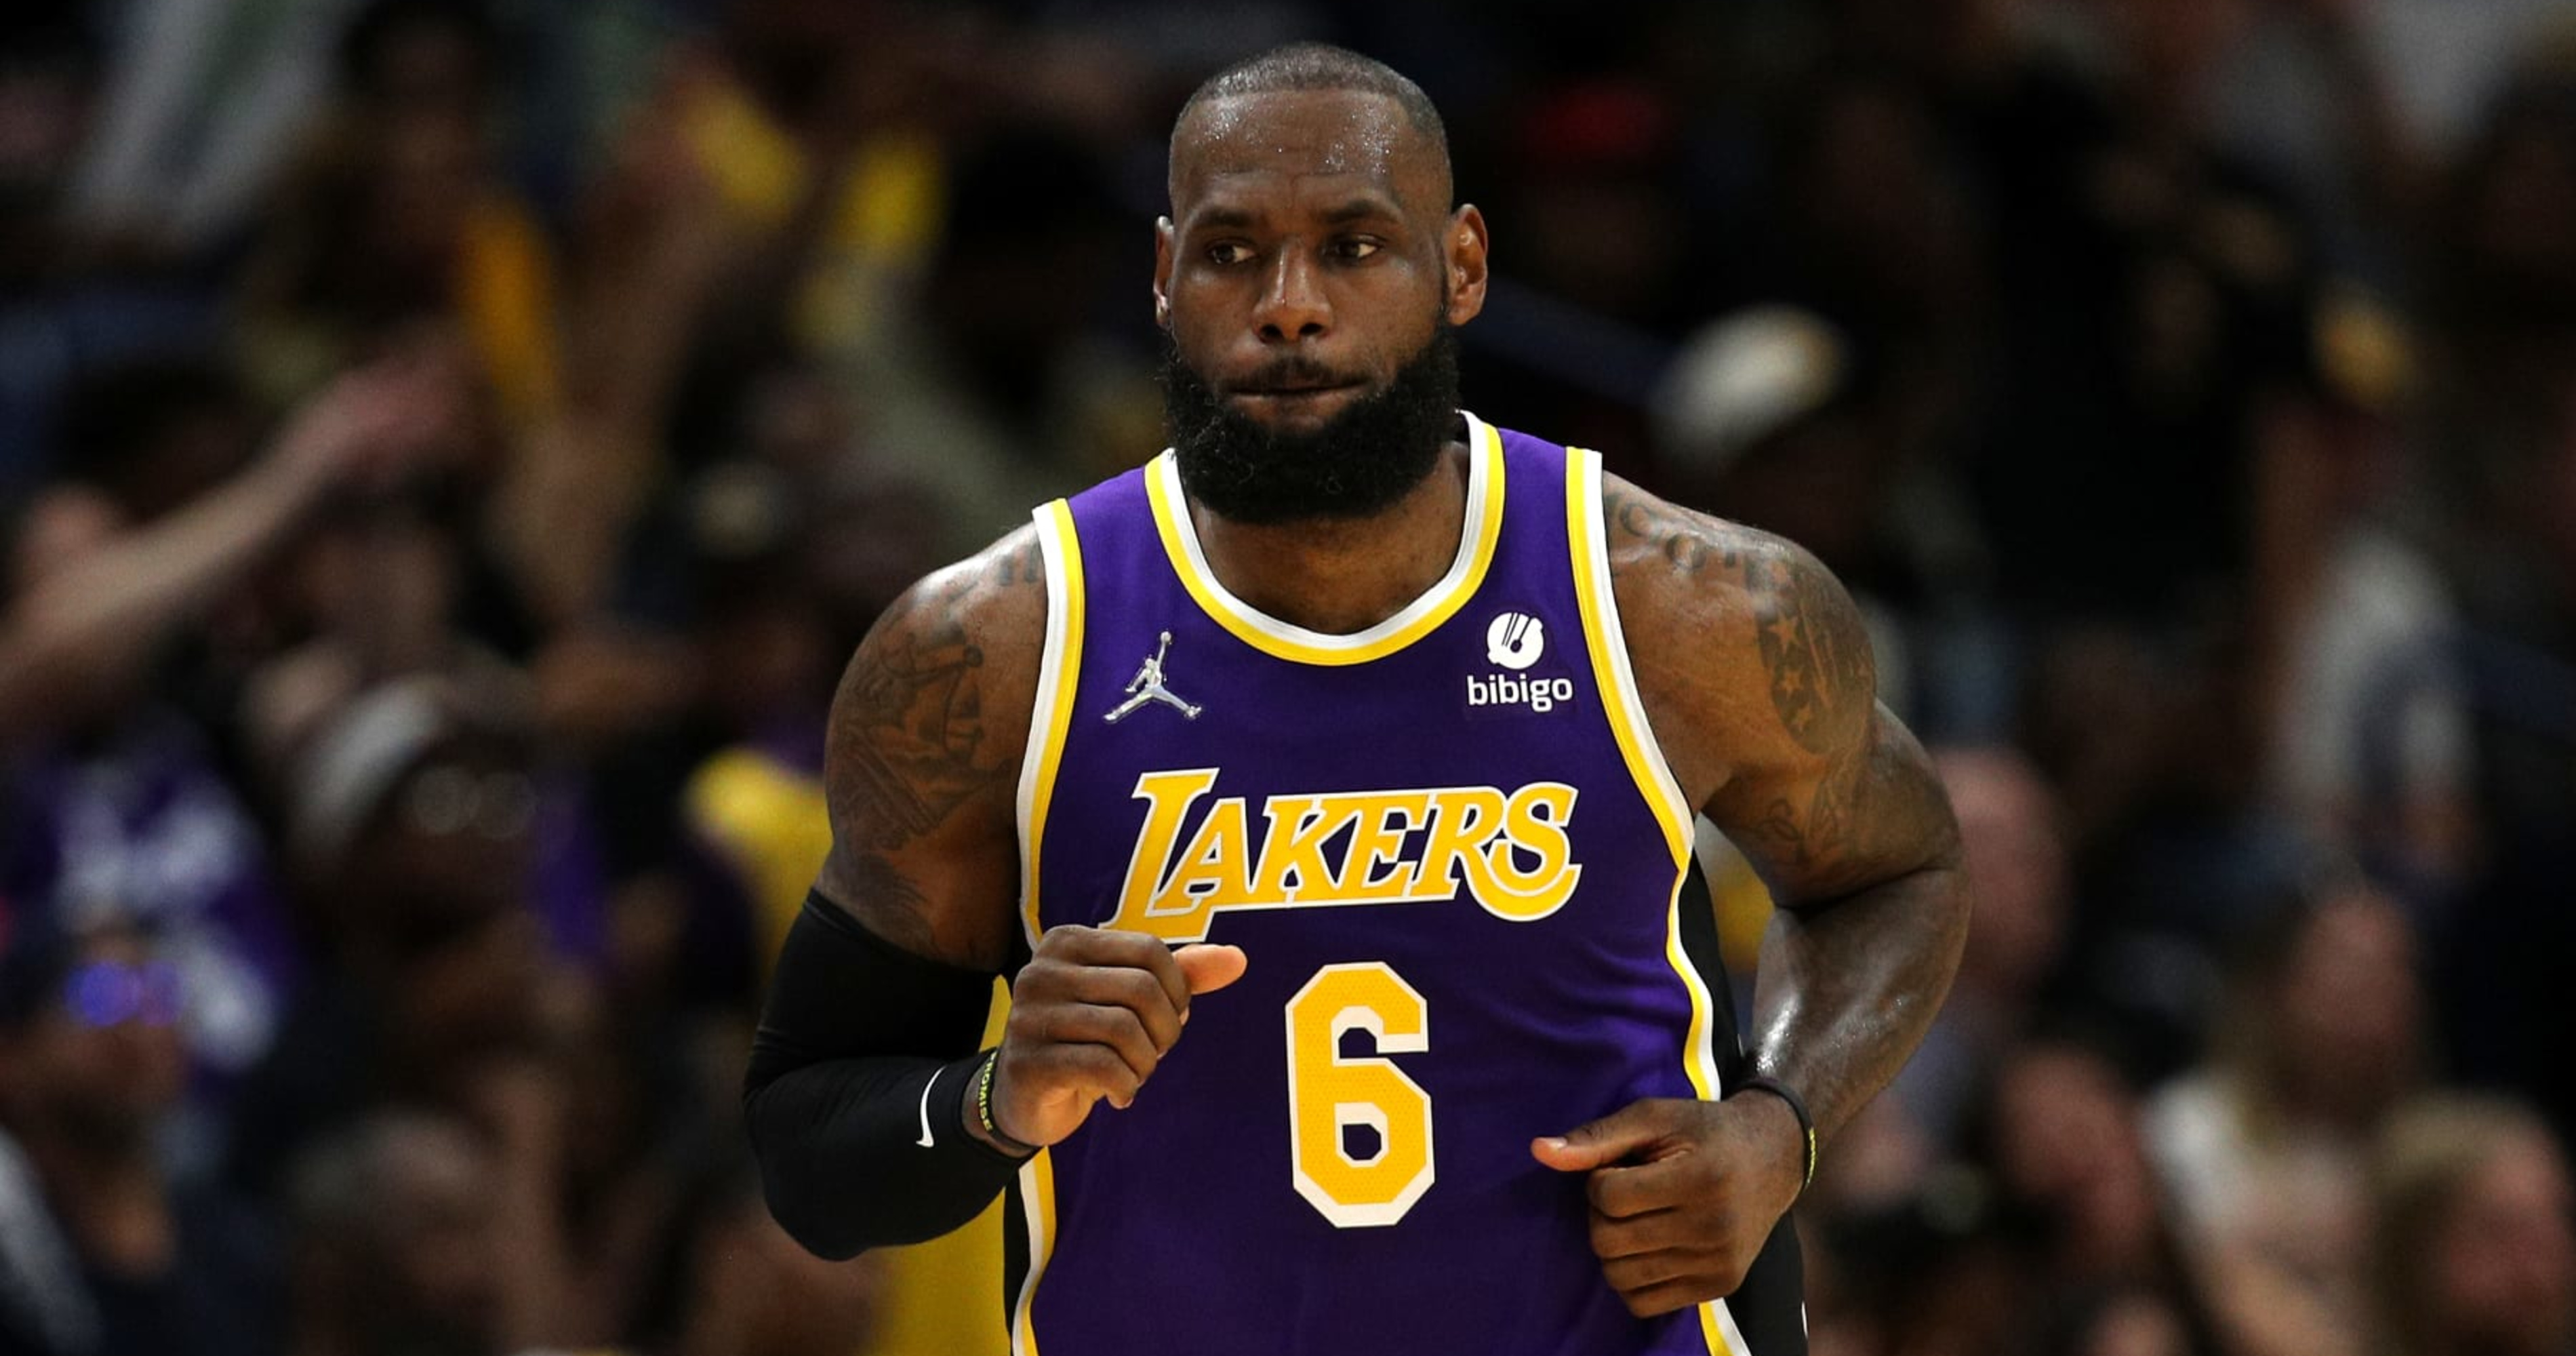 Lakers' Updated Salary Cap After LeBron James' 97.1M Contract